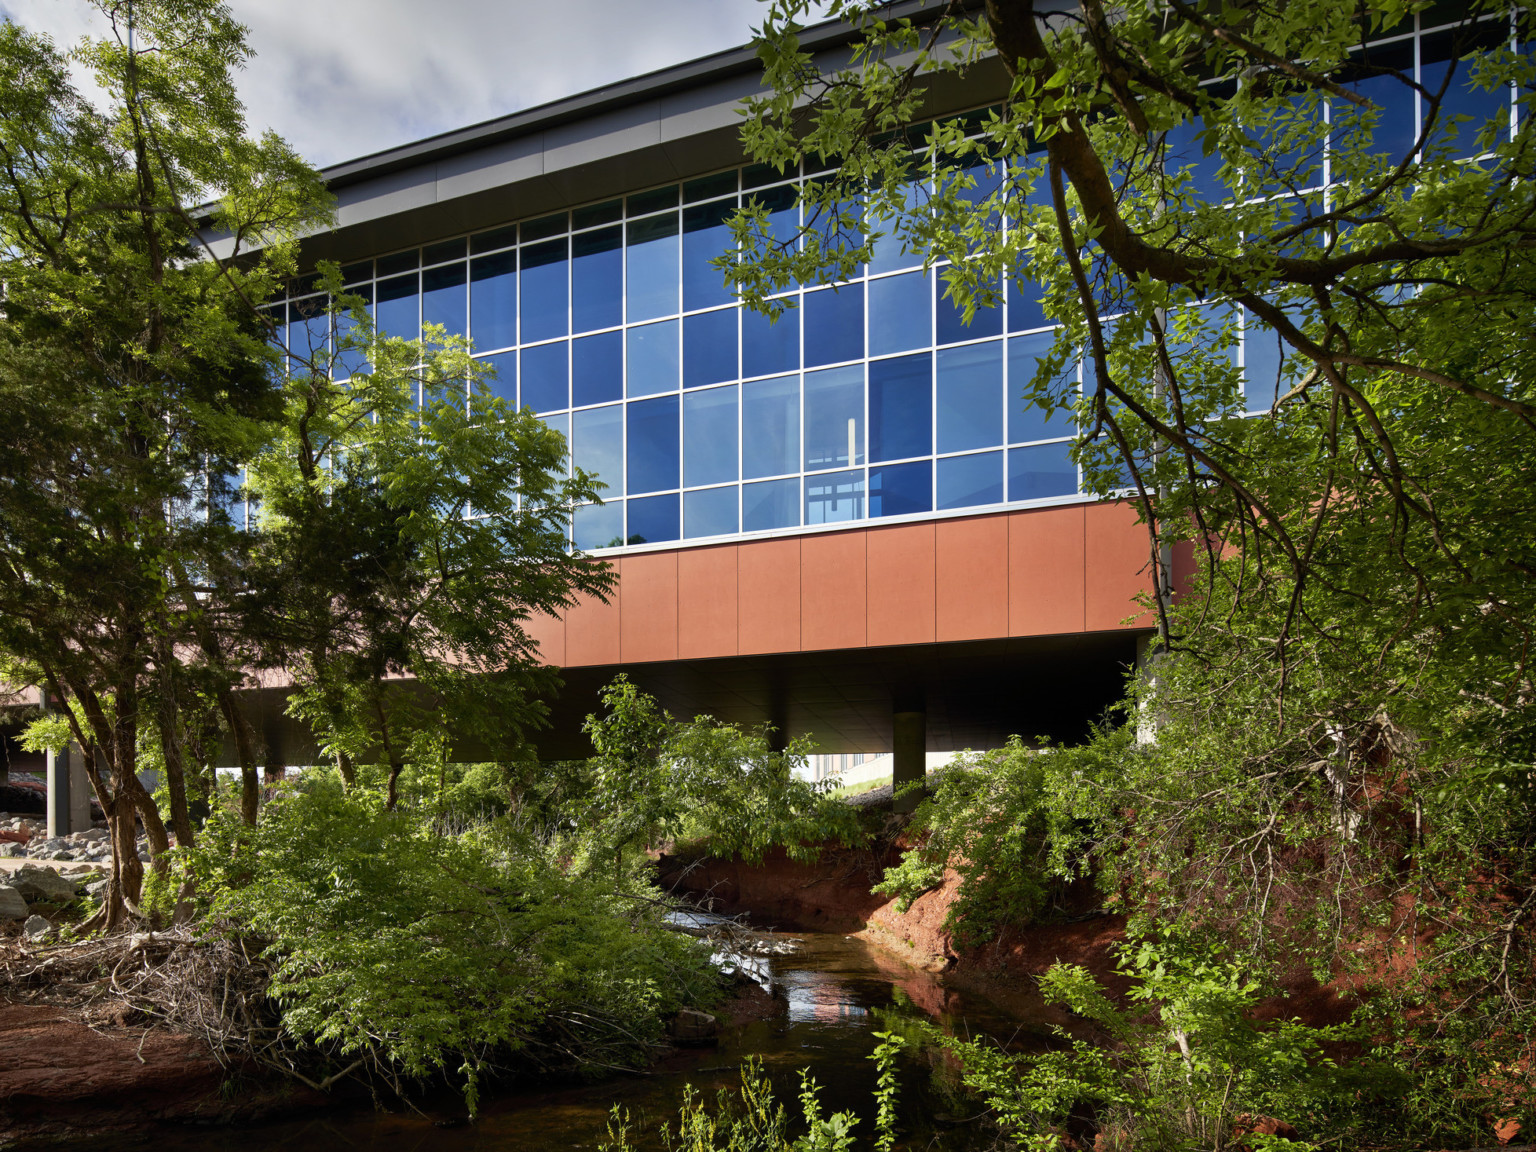 Bridge over stream with double height windows surrounded by trees. Blue tinted glass on orange building